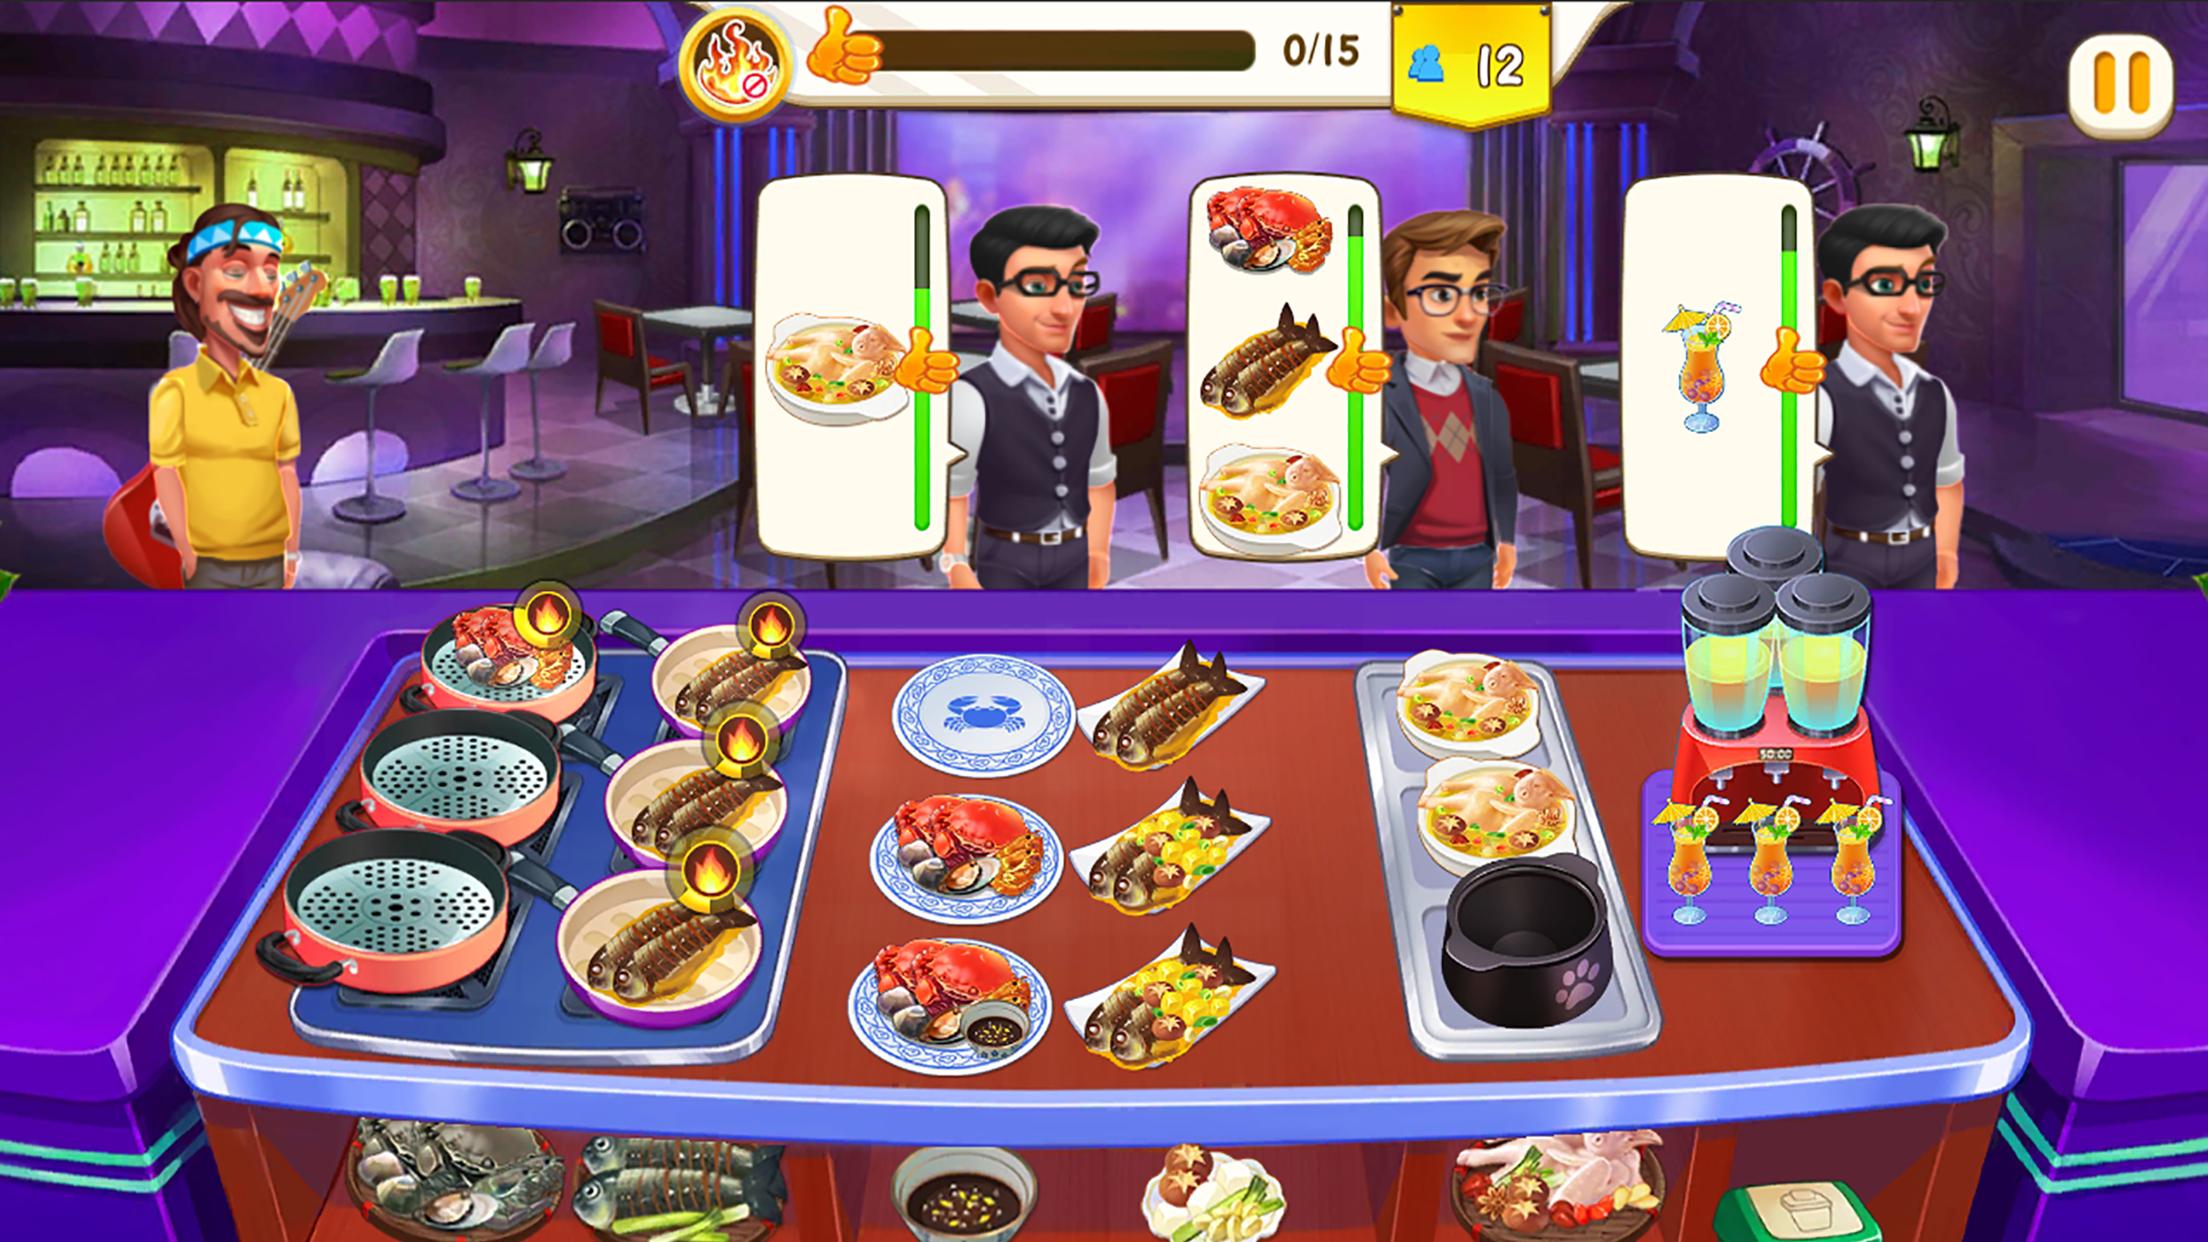 Cooking Rush Bake it to delicious 2.1.2 Screenshot 17